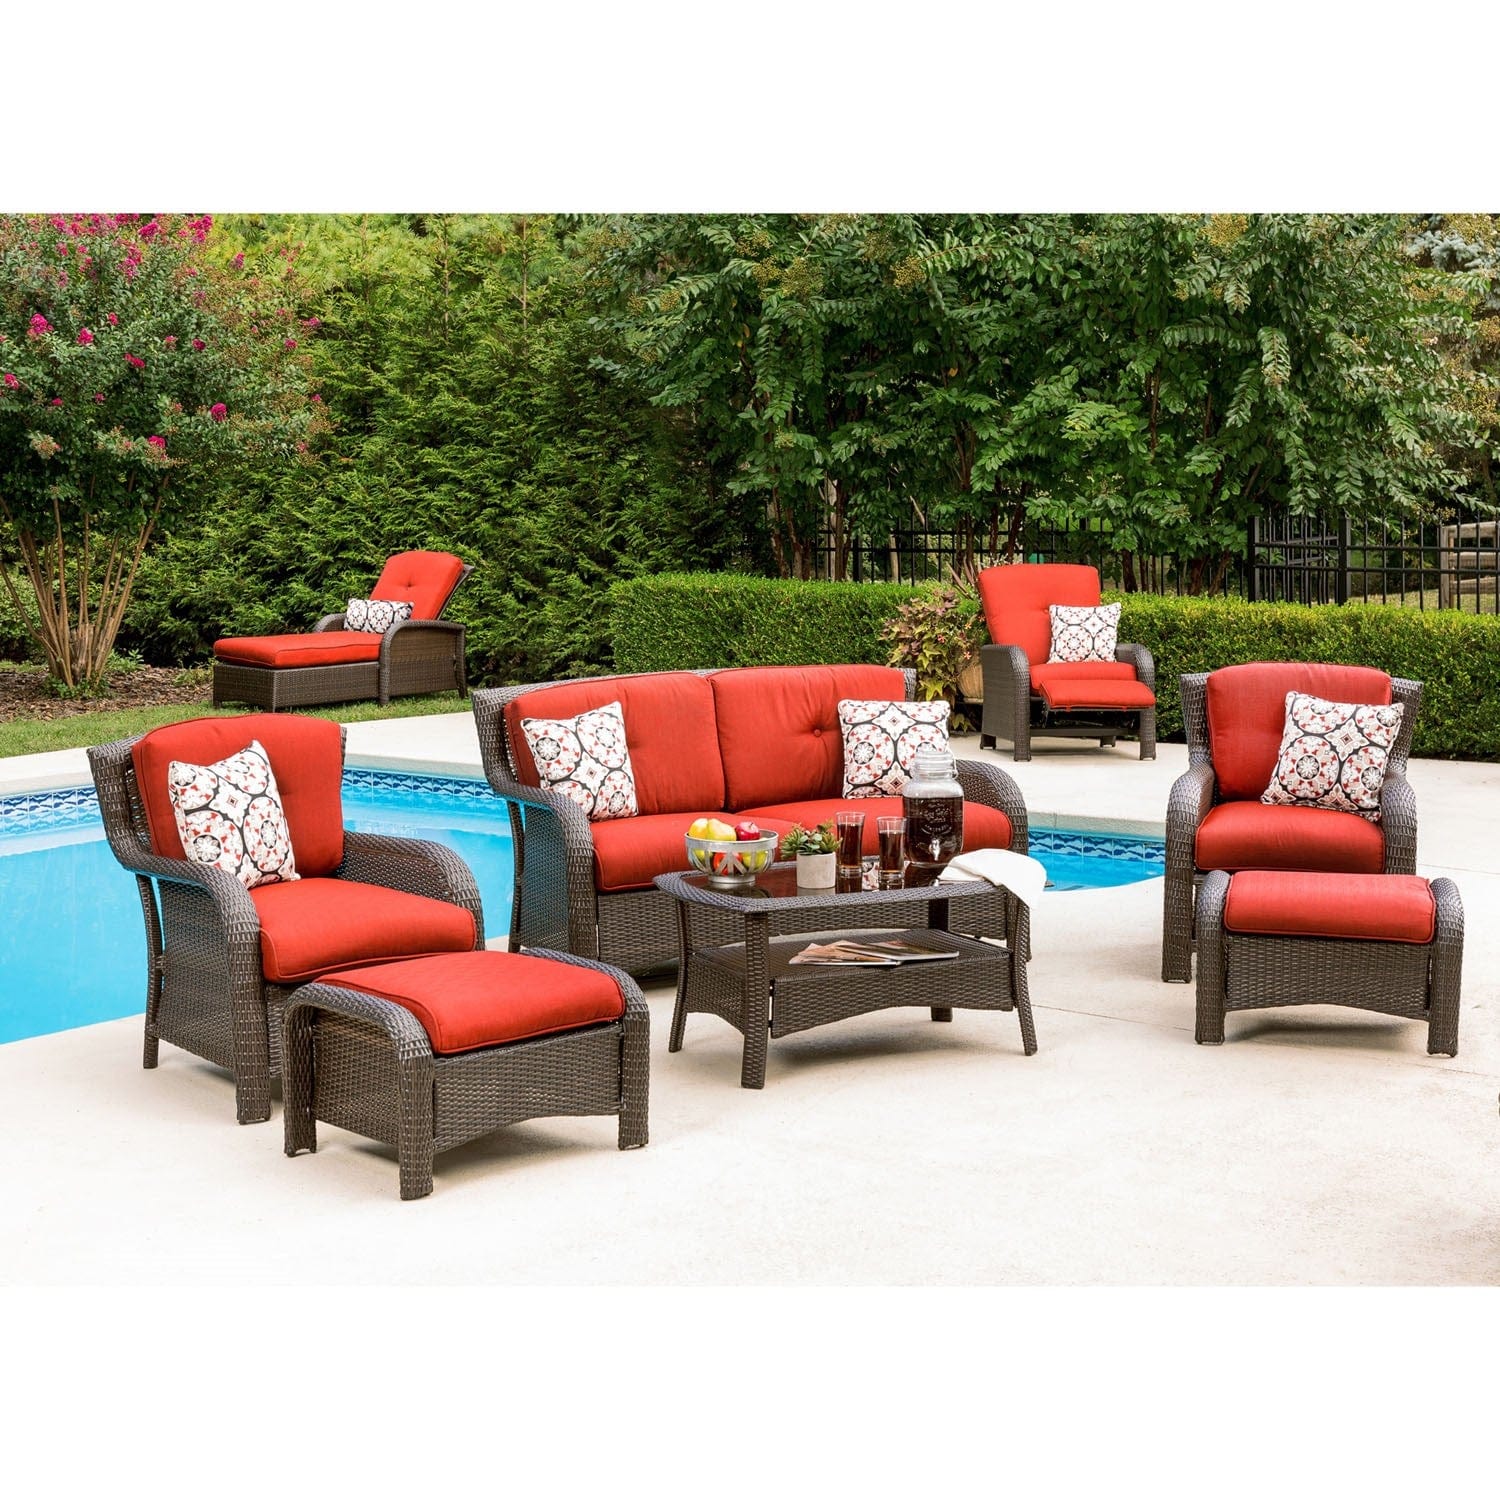 Hanover Lounge Chairs Hanover Strathmere Steel Frames Luxury Recliner in Crimson Red | STRATHRECRED